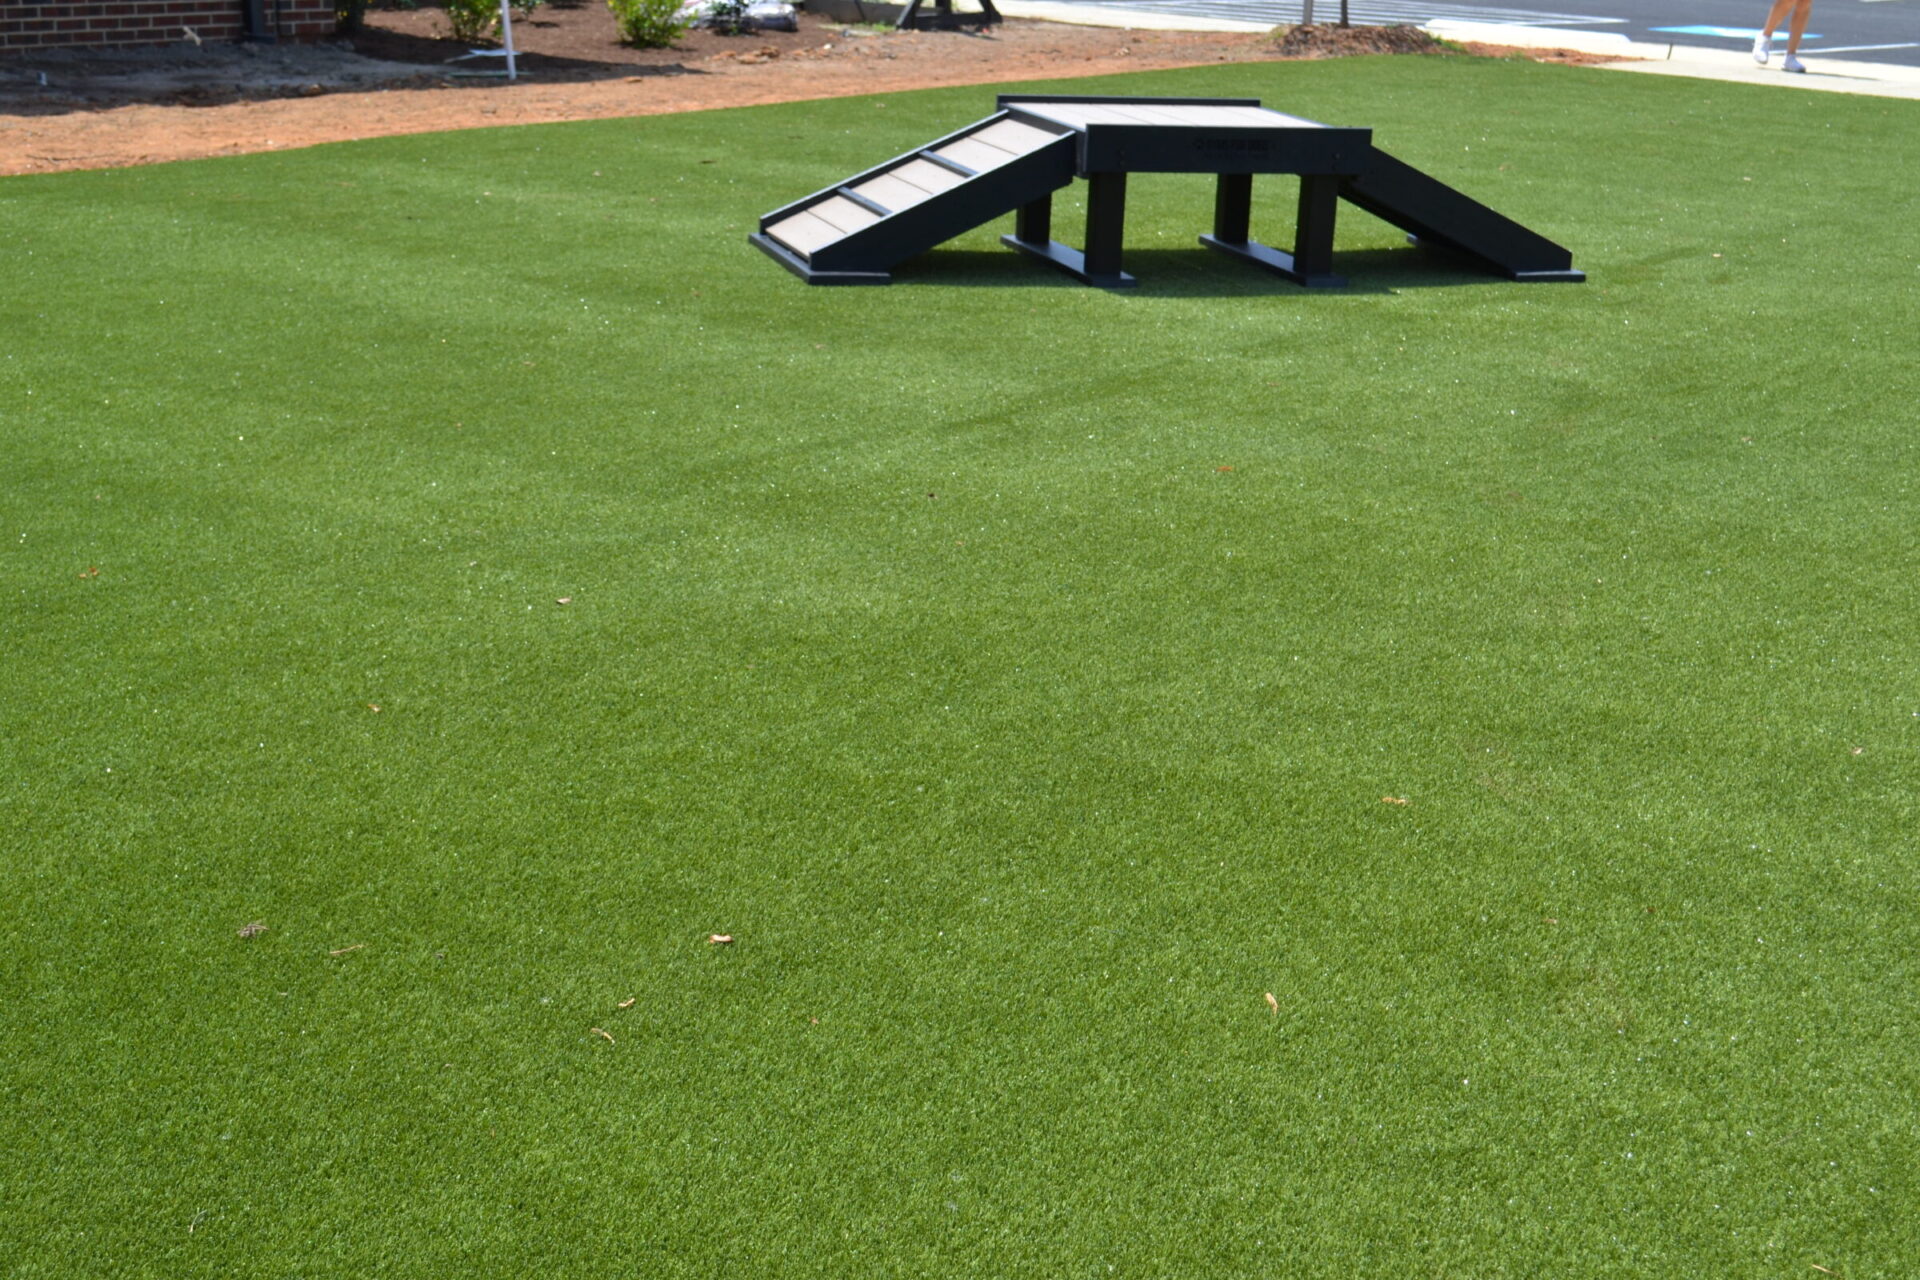 A black dog agility ramp sits on artificial green grass with a clear sky above and a person visible in the background on the right.